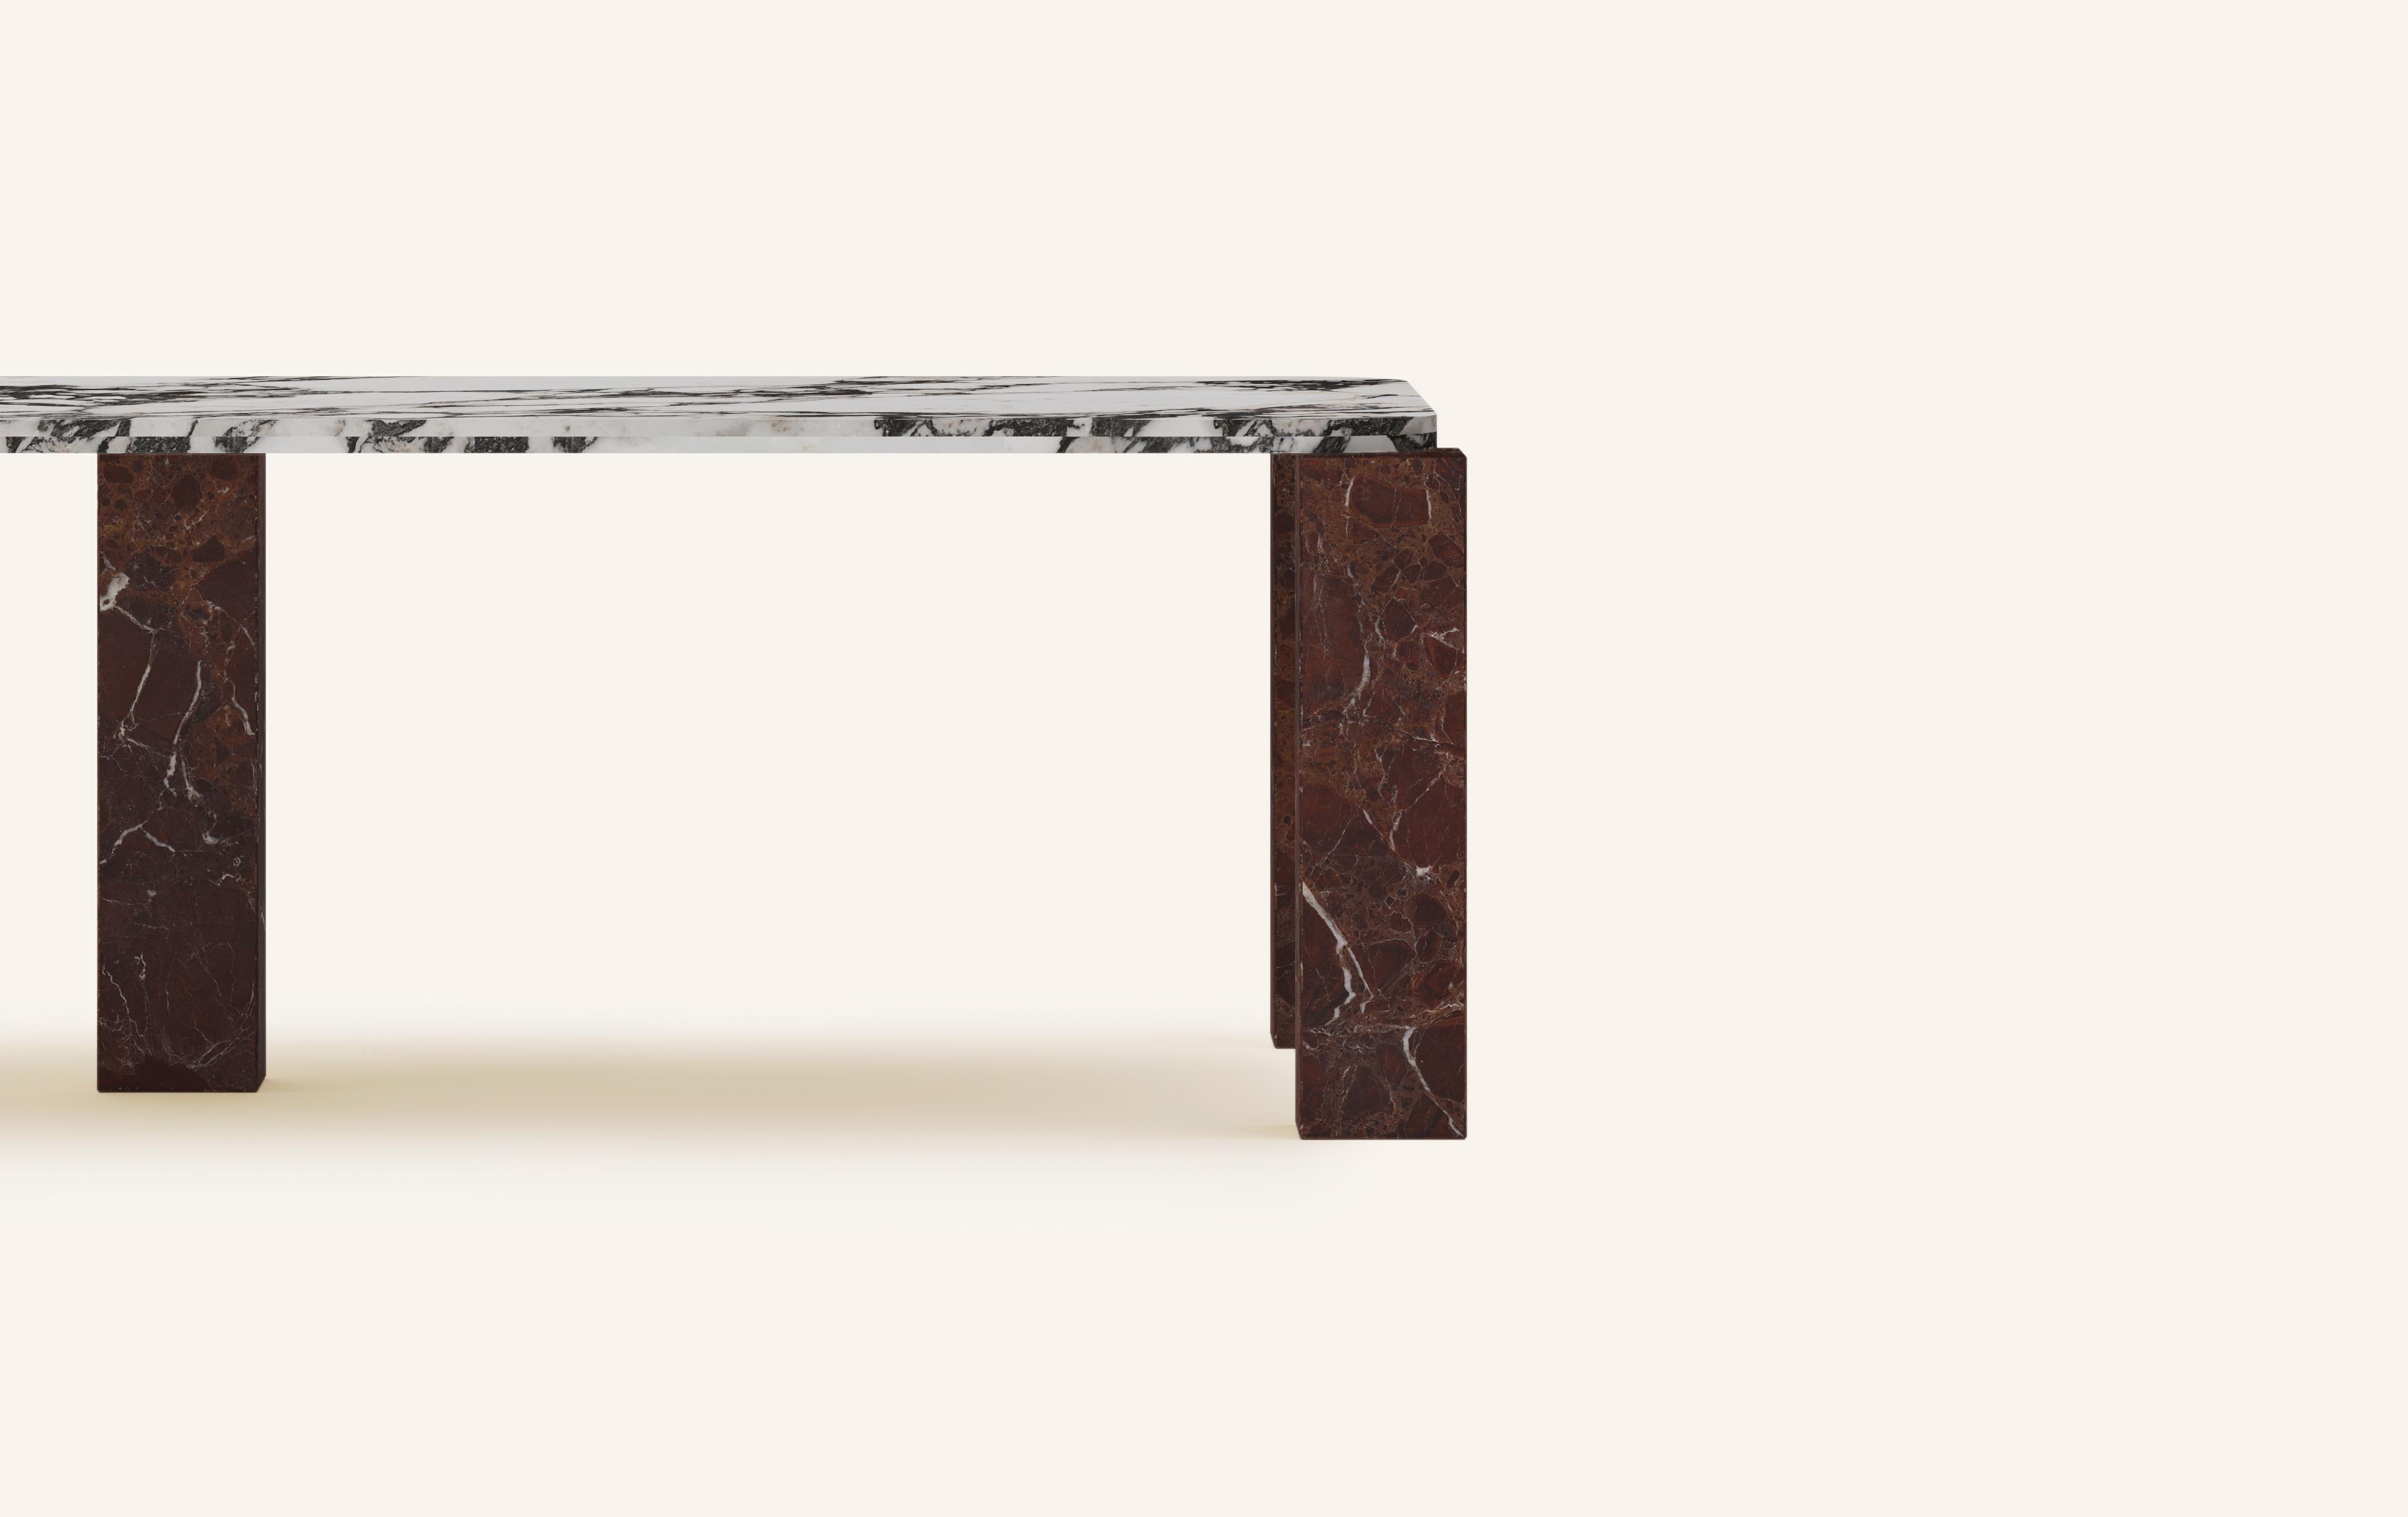 American FORM(LA) Cubo Rectangle Dining Table 98”L x 44”W x 30”H Viola & Rosso Marble For Sale